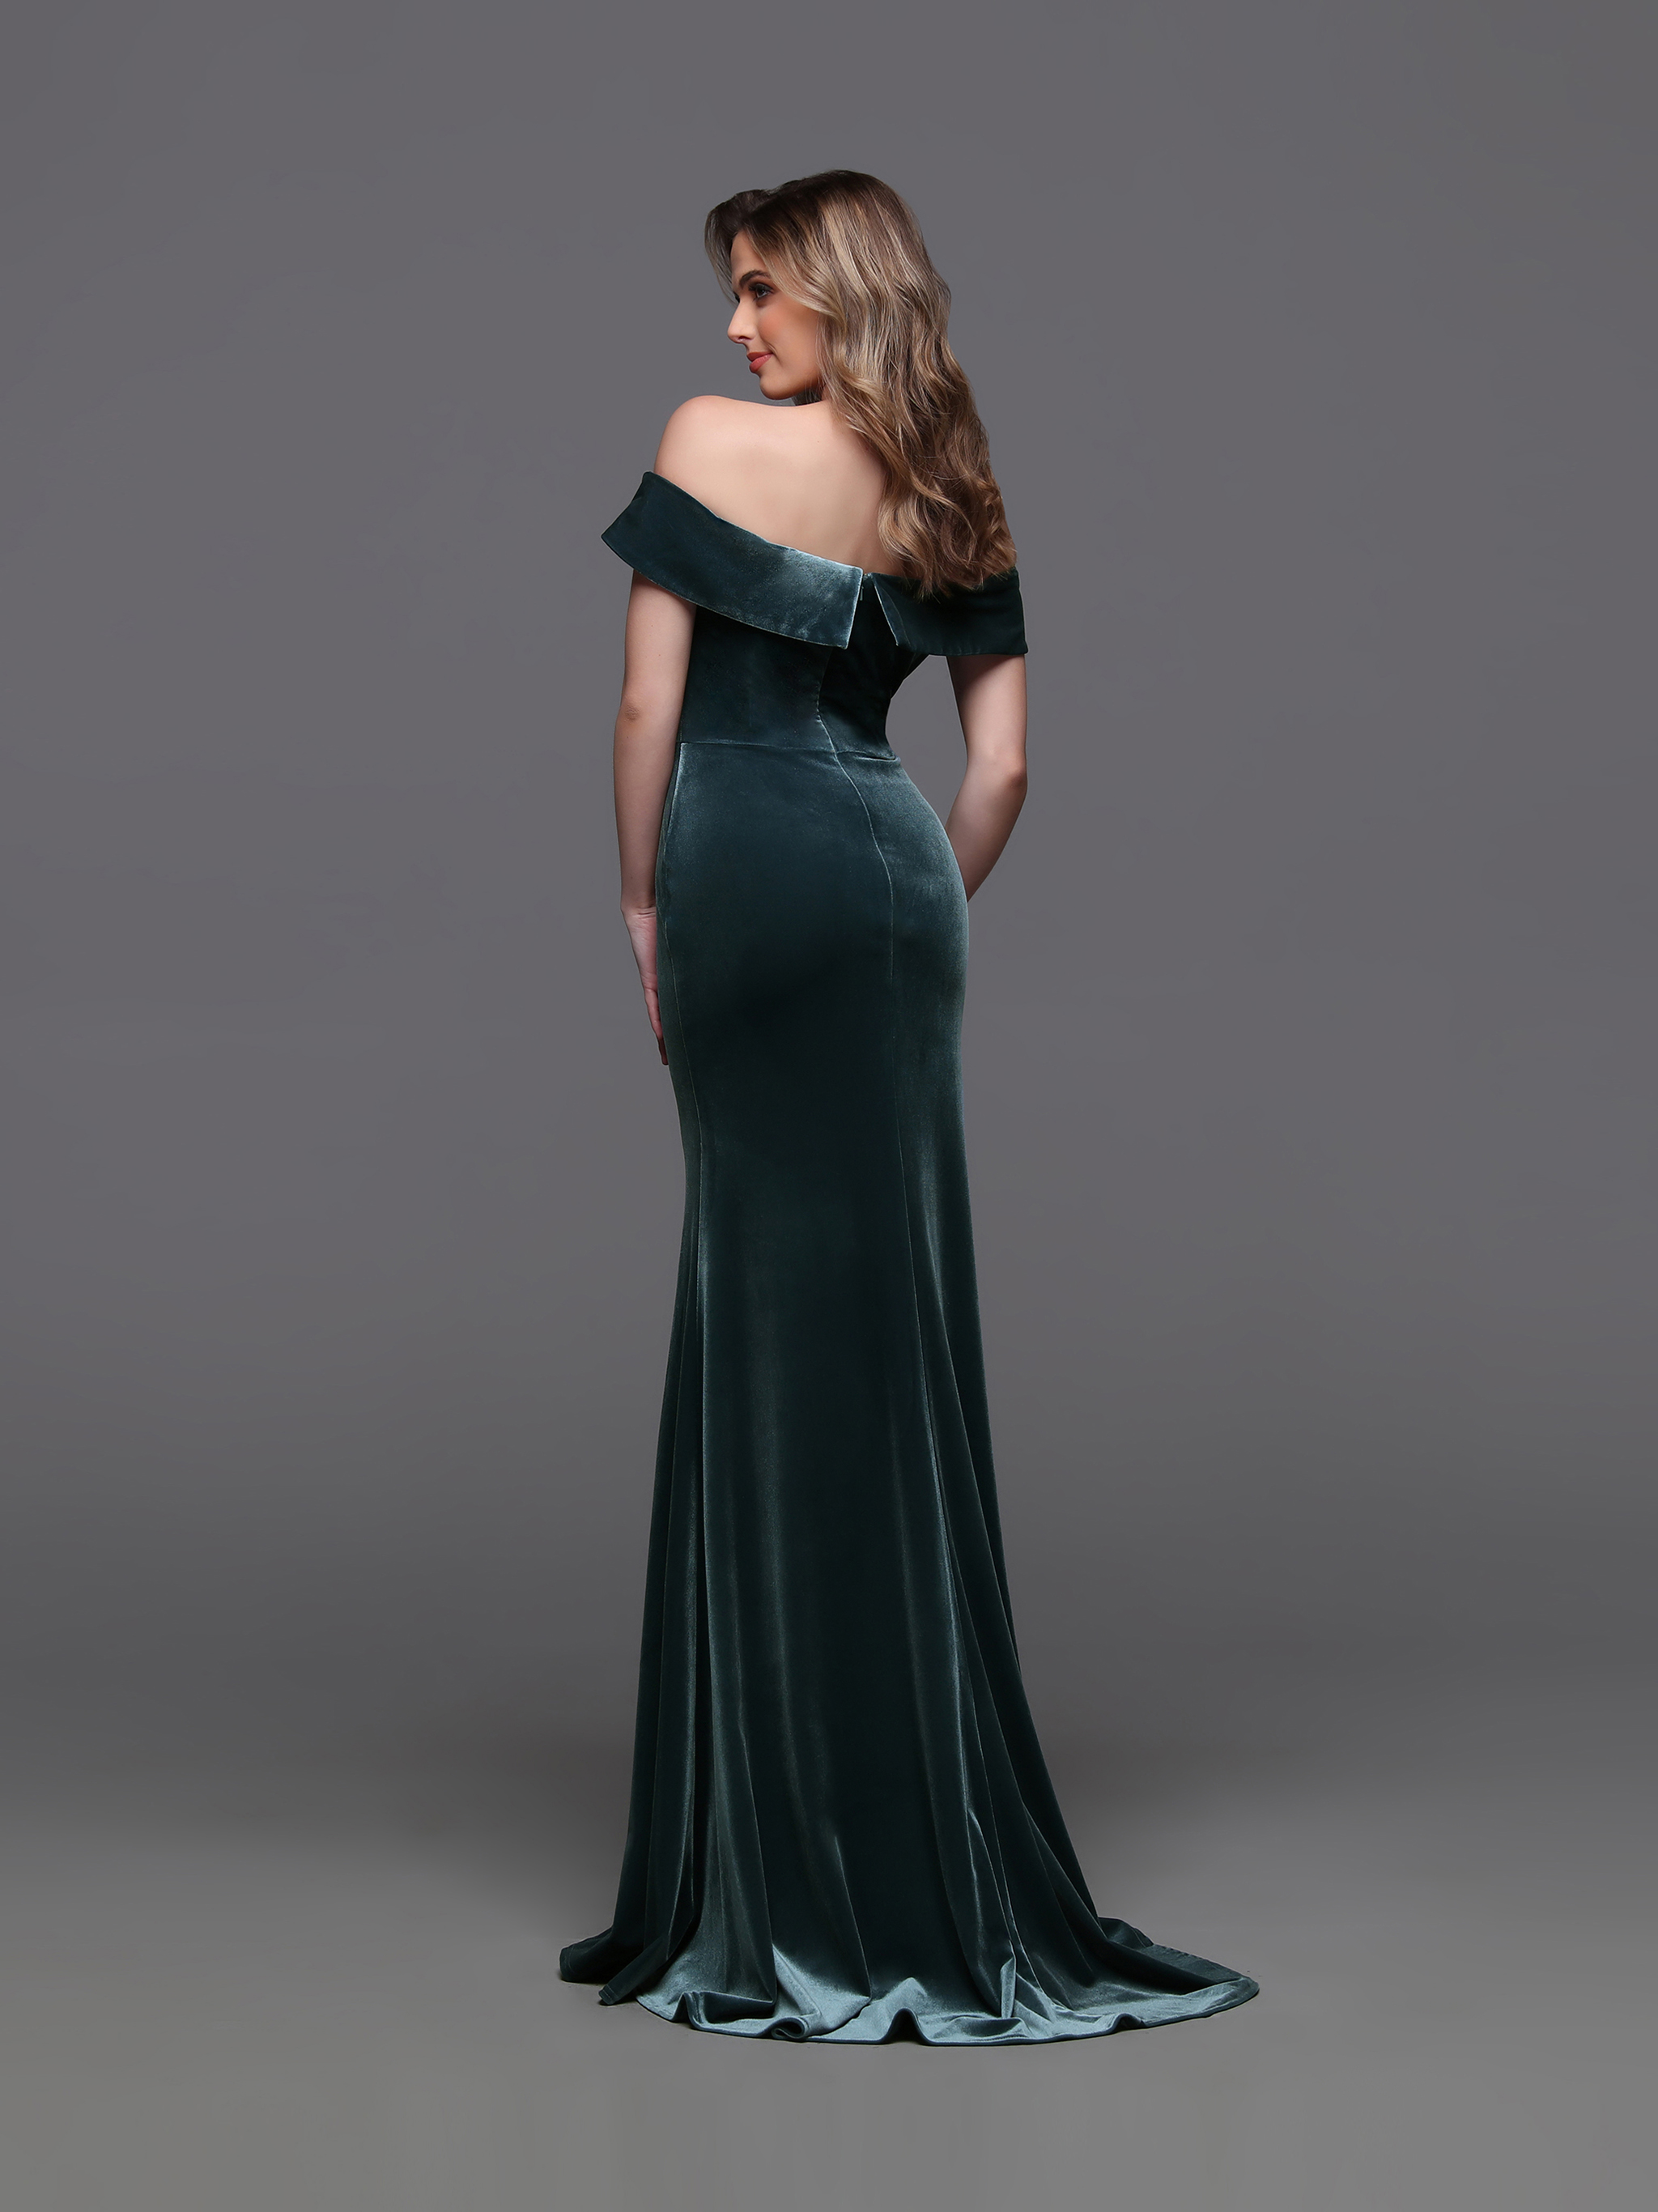 Image showing back view of style #60676